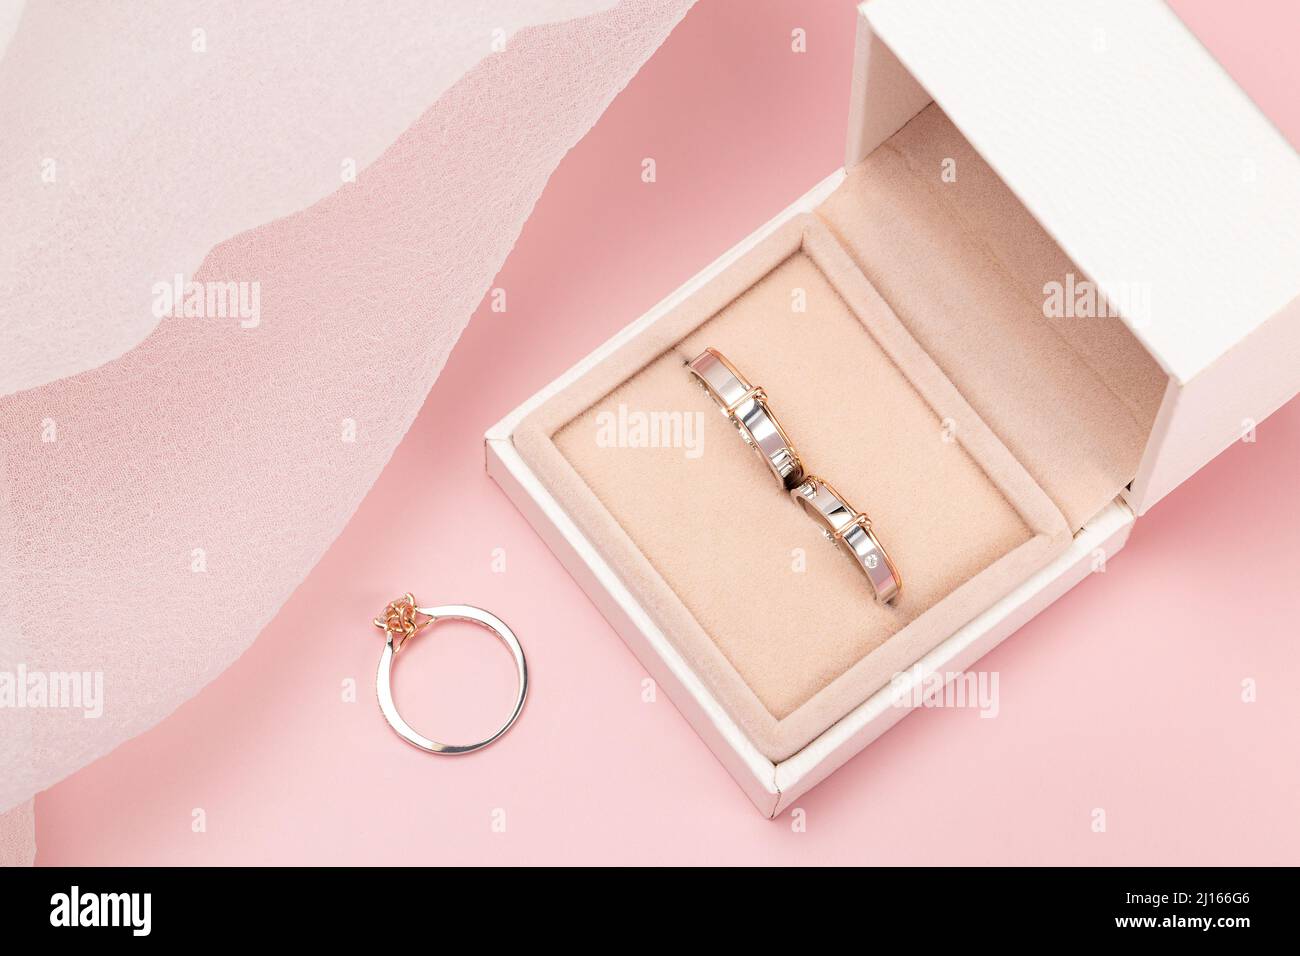 wedding ring, engagement ring in a box taken on a pink background decorated with motifs and images of the wedding day Stock Photo